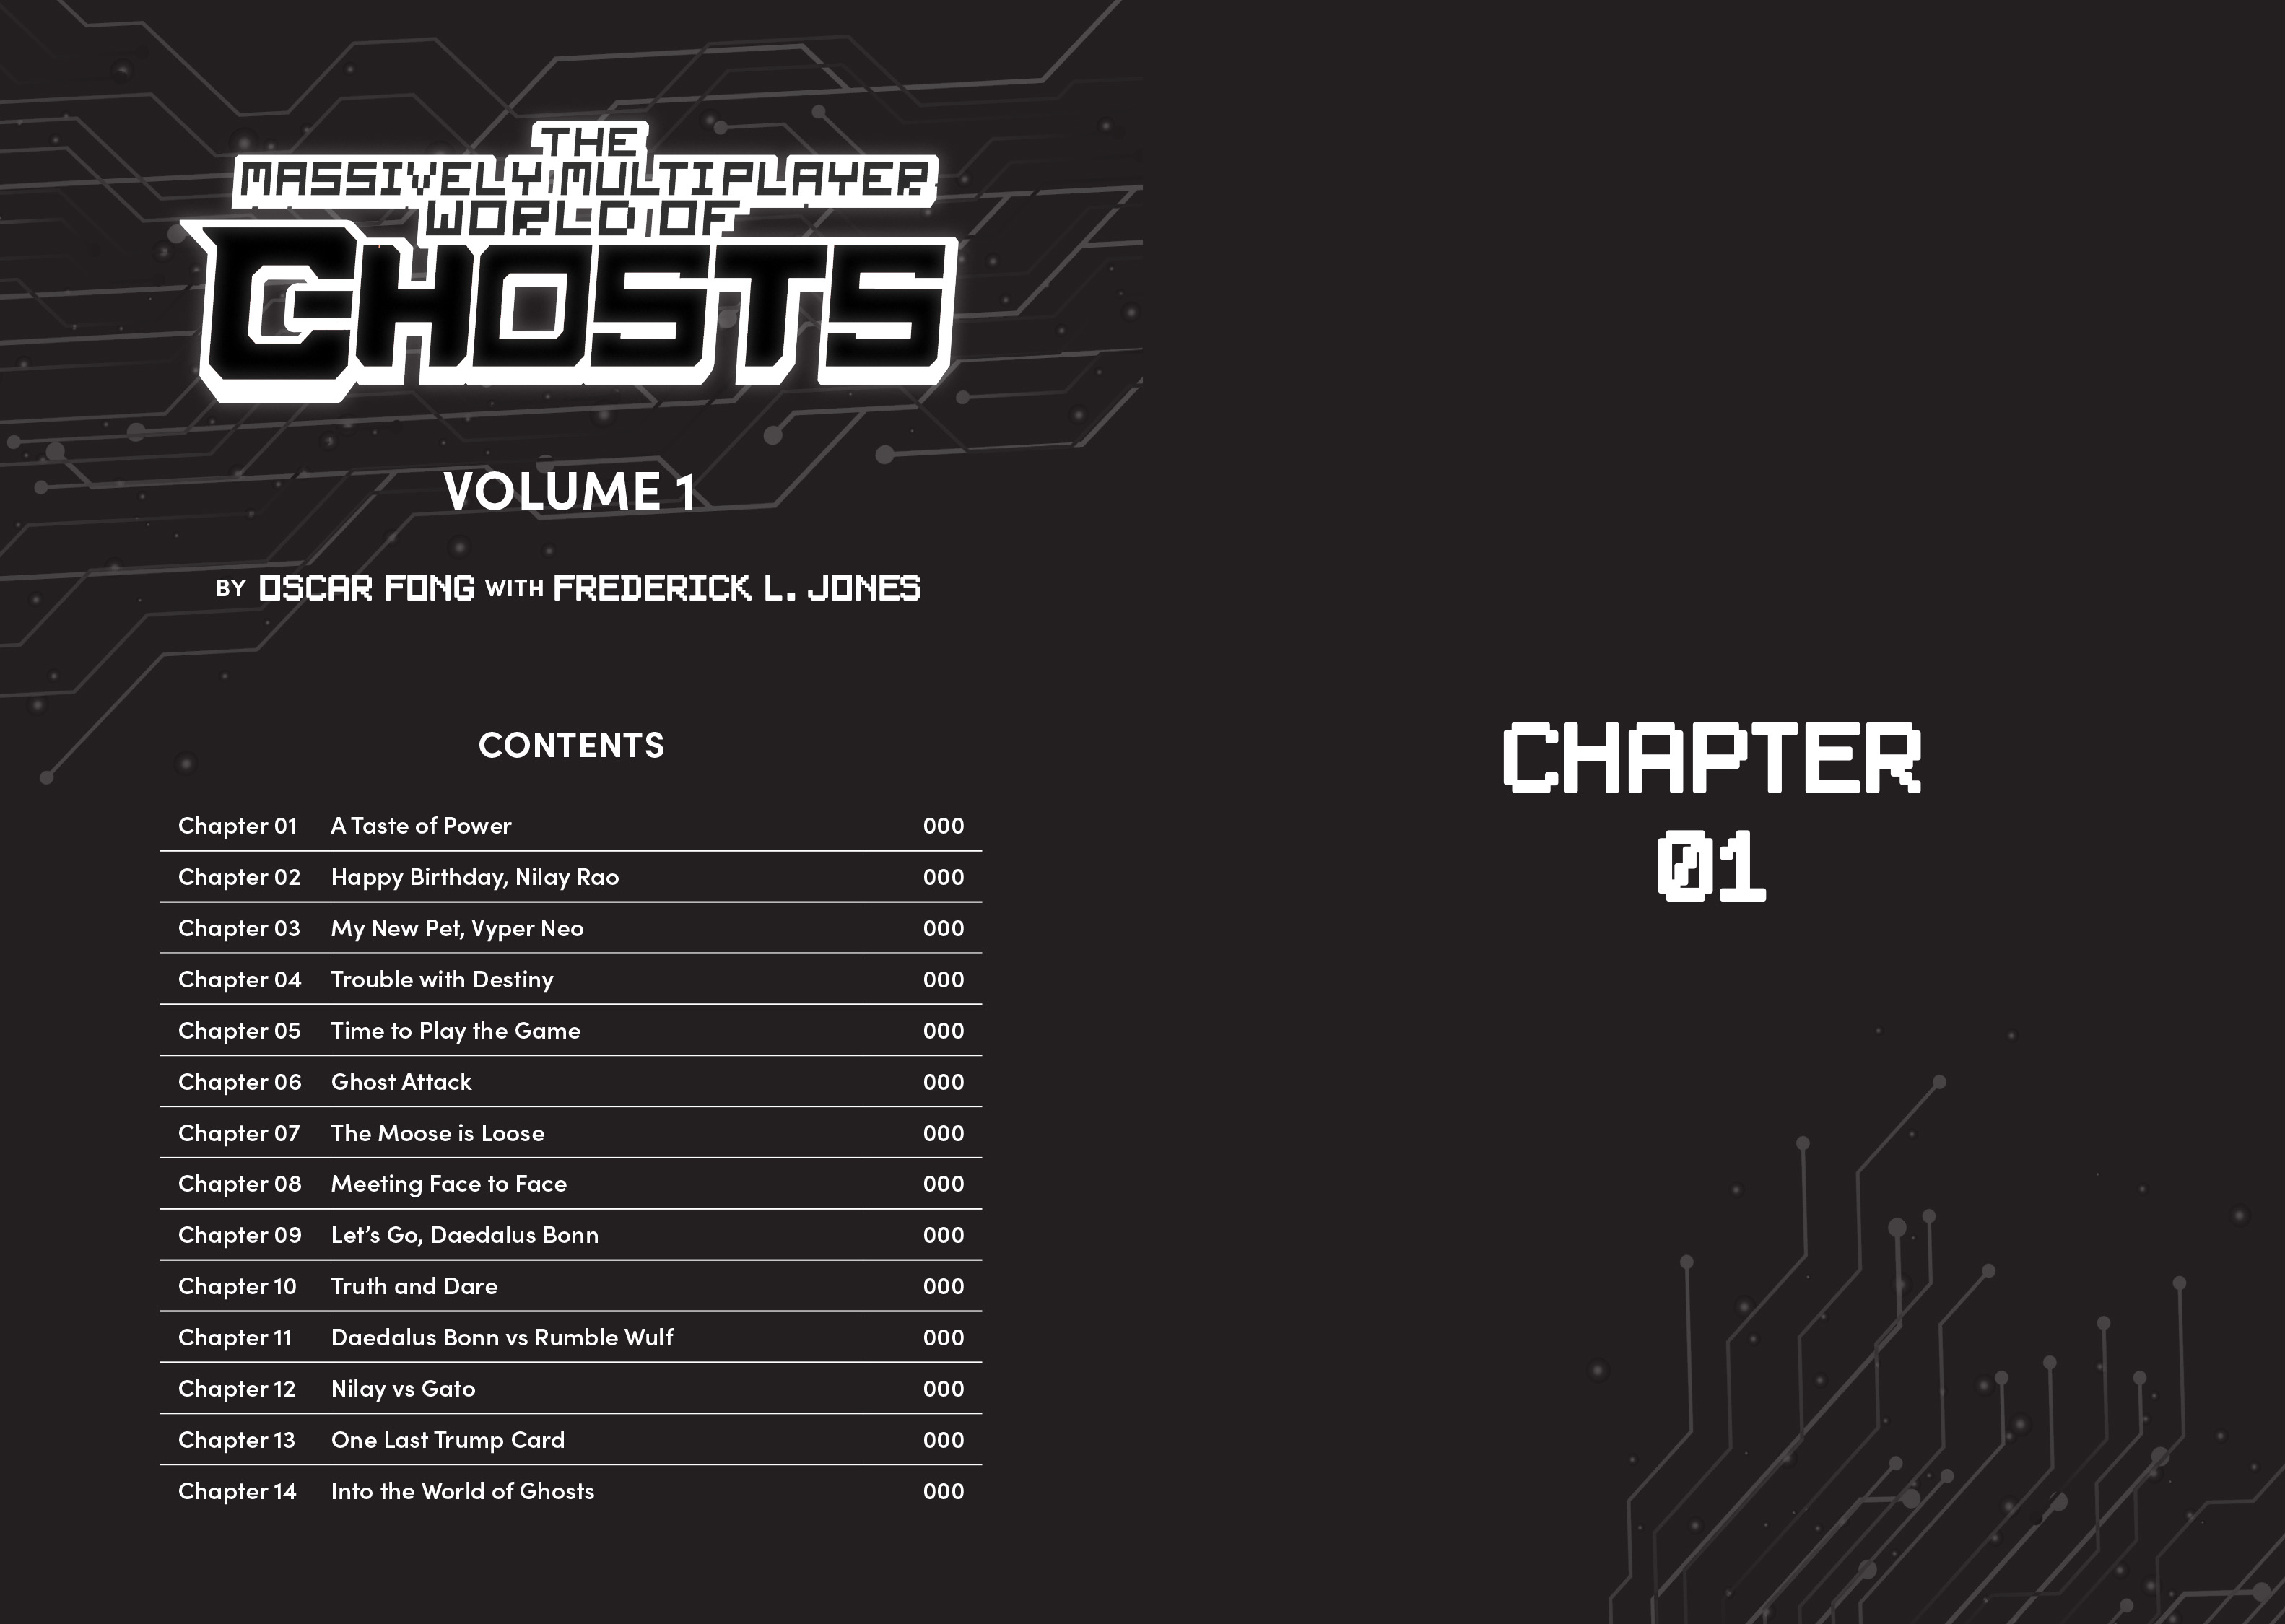 The Massively Multiplayer World of Ghosts, Volume 1